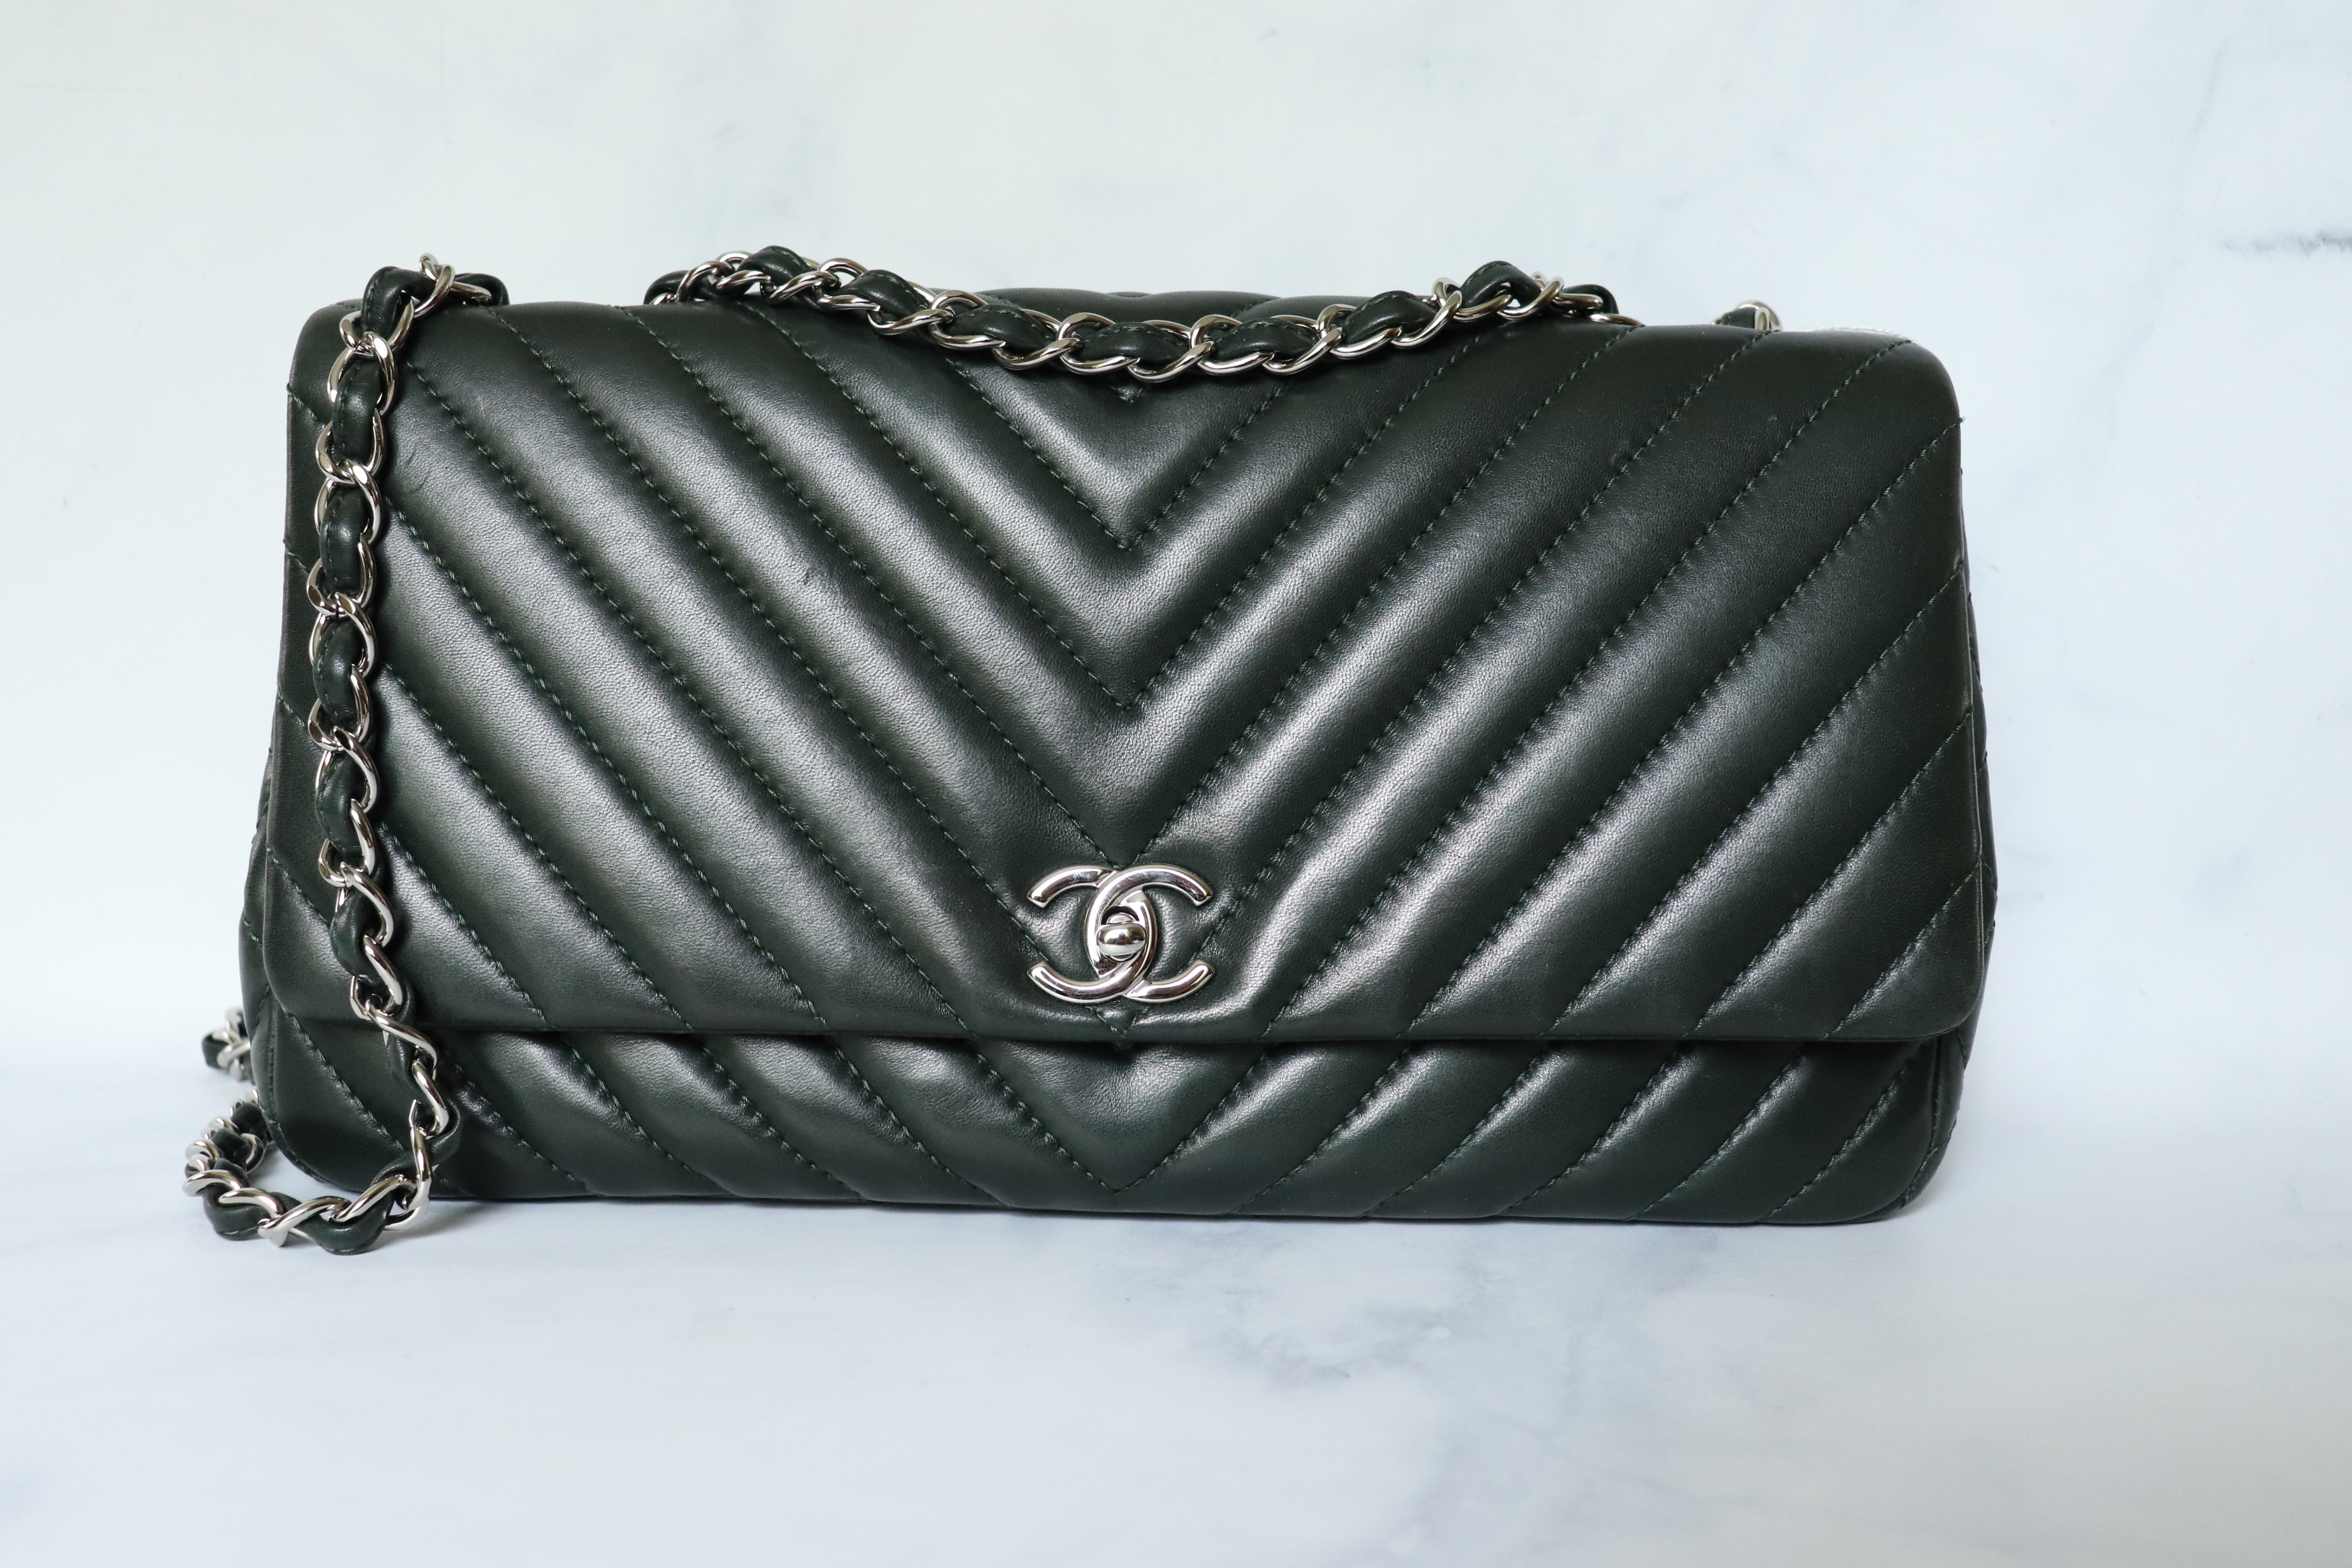 Chanel Surpique Flap Forest Green Supple Chevron with Silver Hardware,  Preowned in Dustbag - Julia Rose Boston